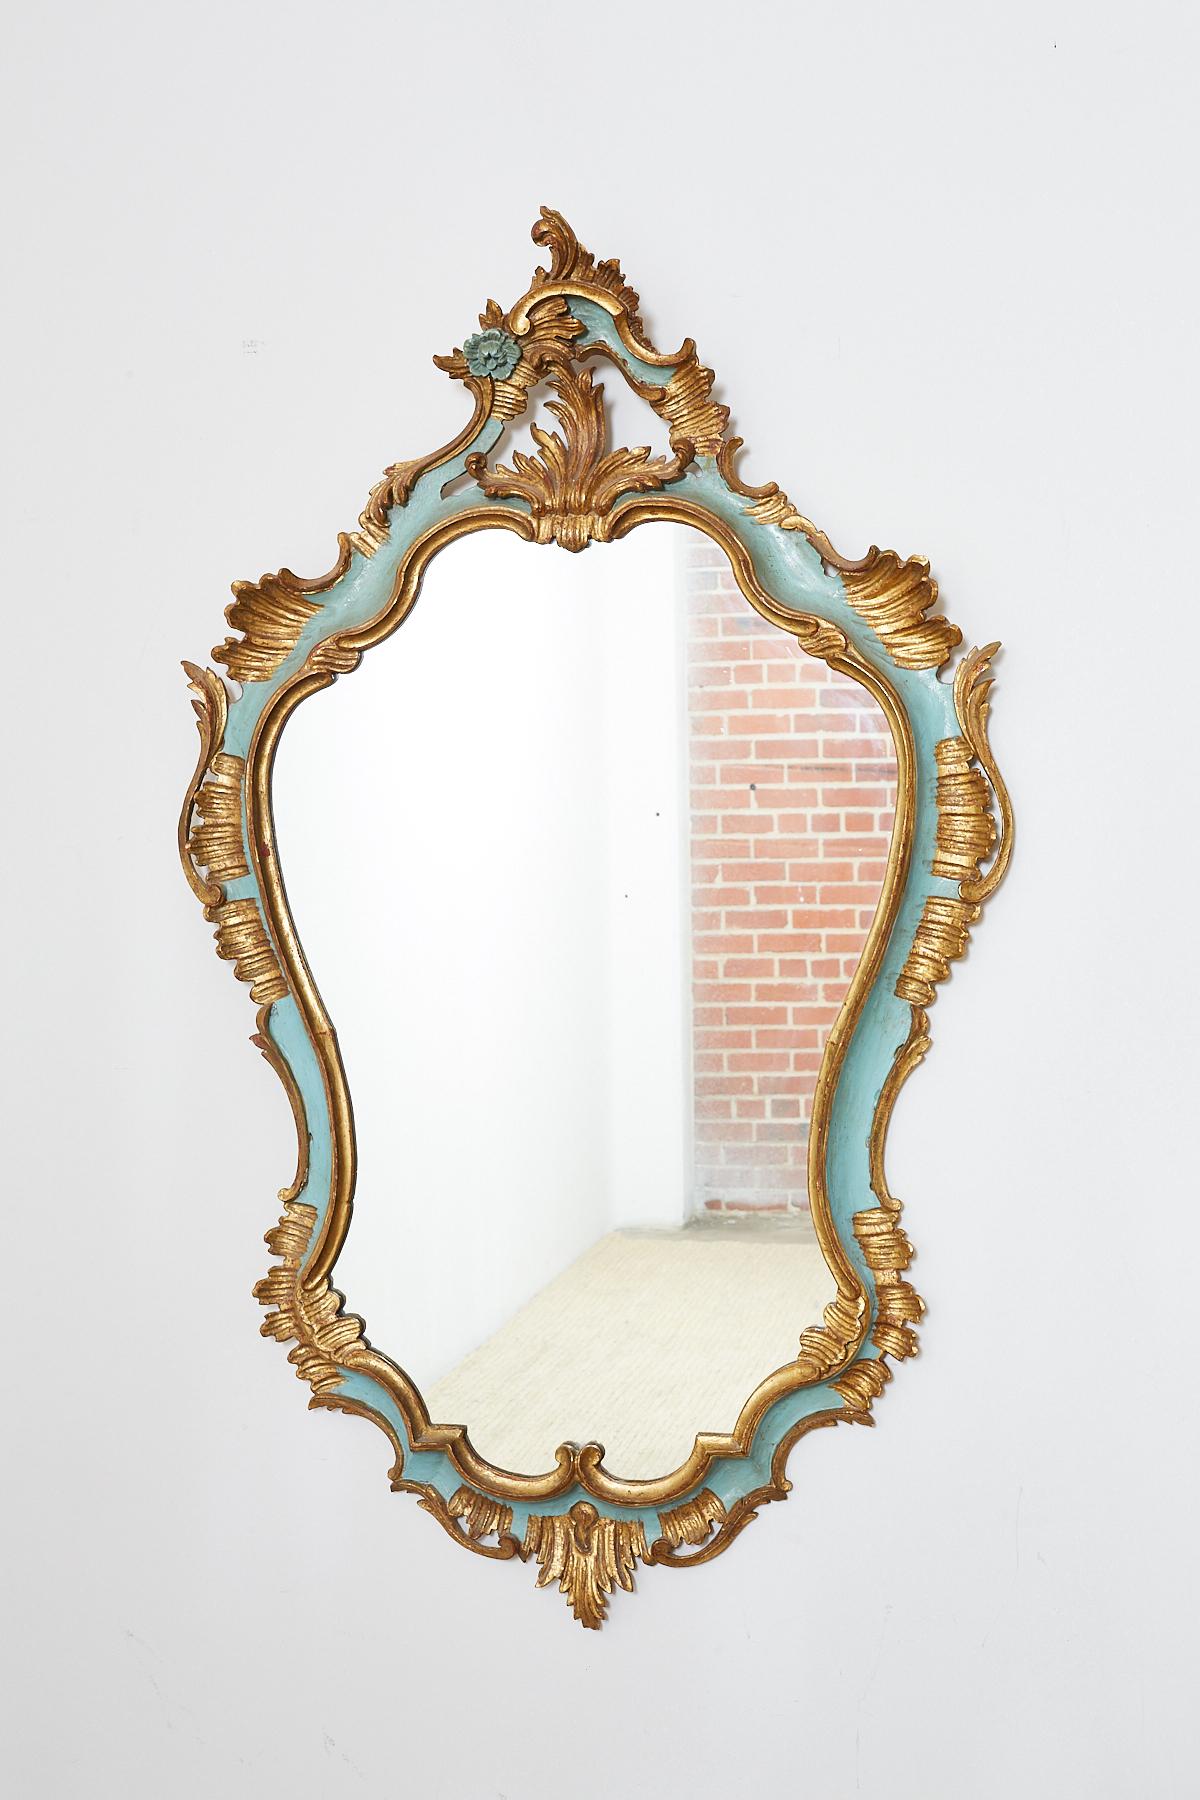 Stunning 19th century Italian carved Rococo style mirror in a cartouche form. Features a gilt finish with a robin's egg blue accent around the border. Hand-carved rocaille frame featuring acanthus sprays and flowers. Beautifully faded gold leaf